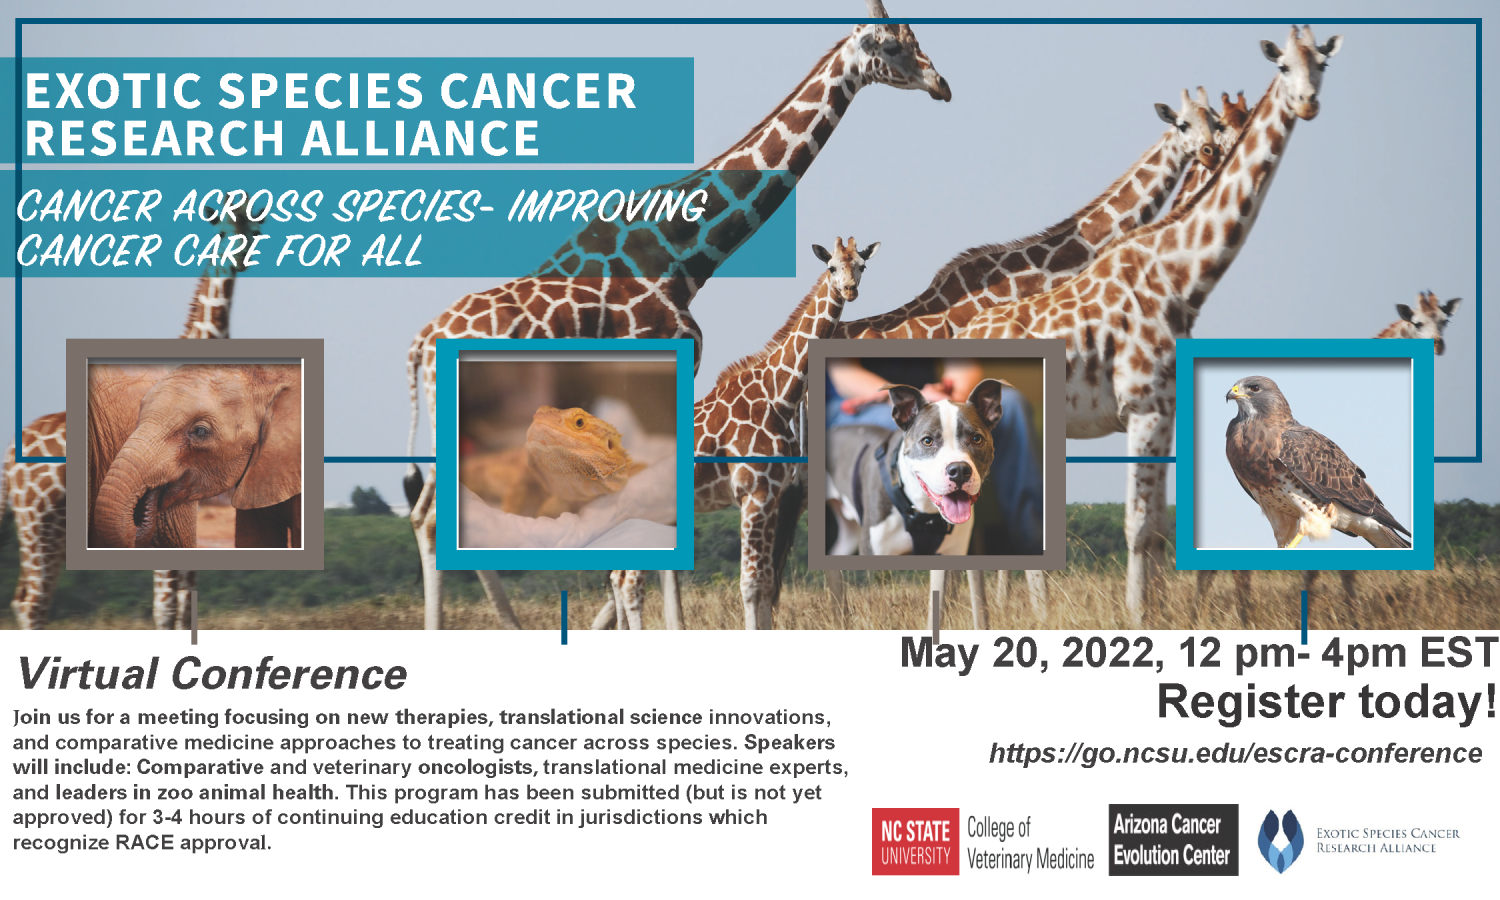 Cancer Across Species – Improving Cancer Care for All